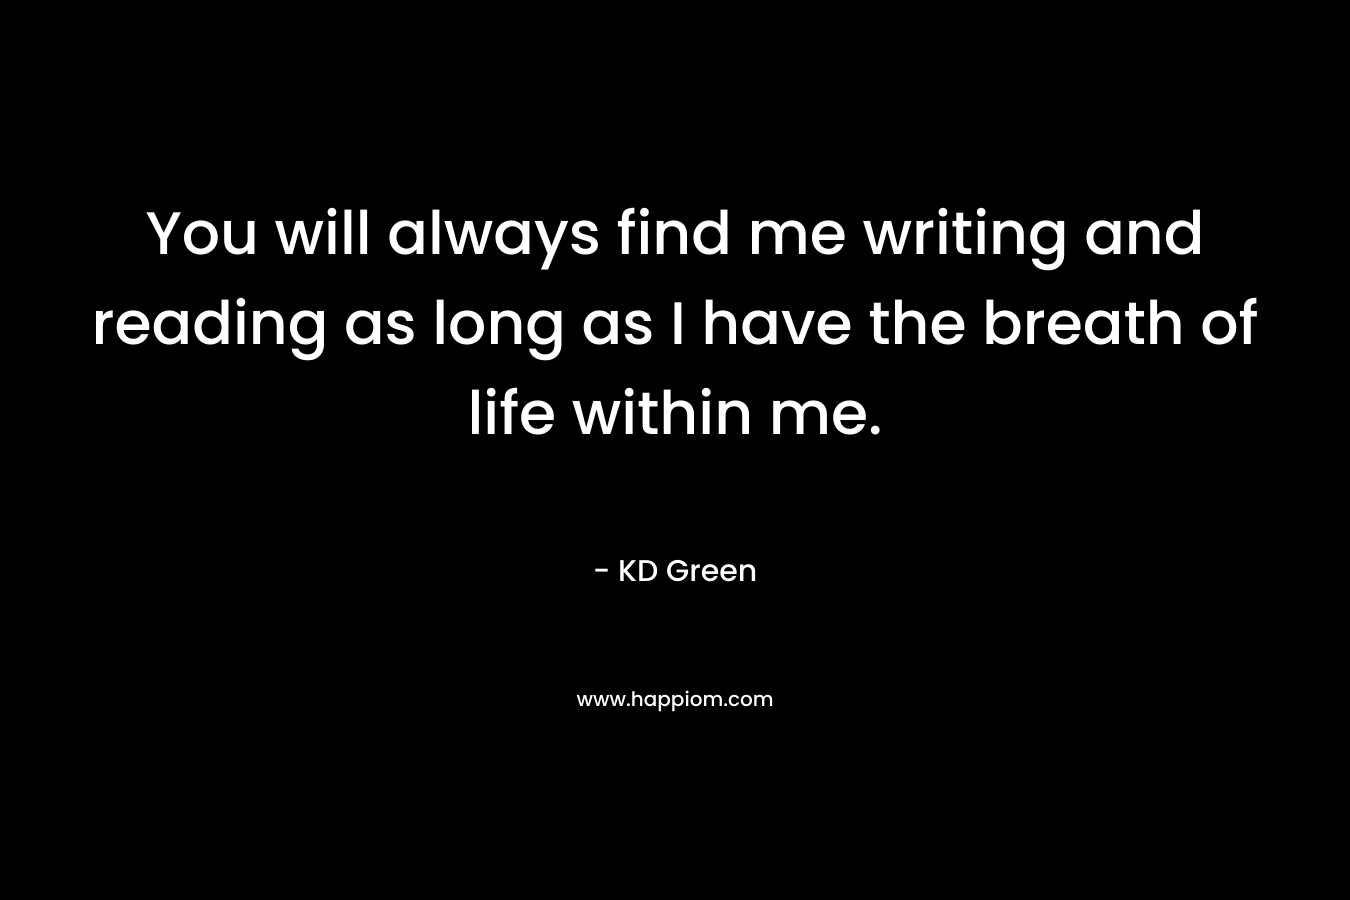 You will always find me writing and reading as long as I have the breath of life within me.